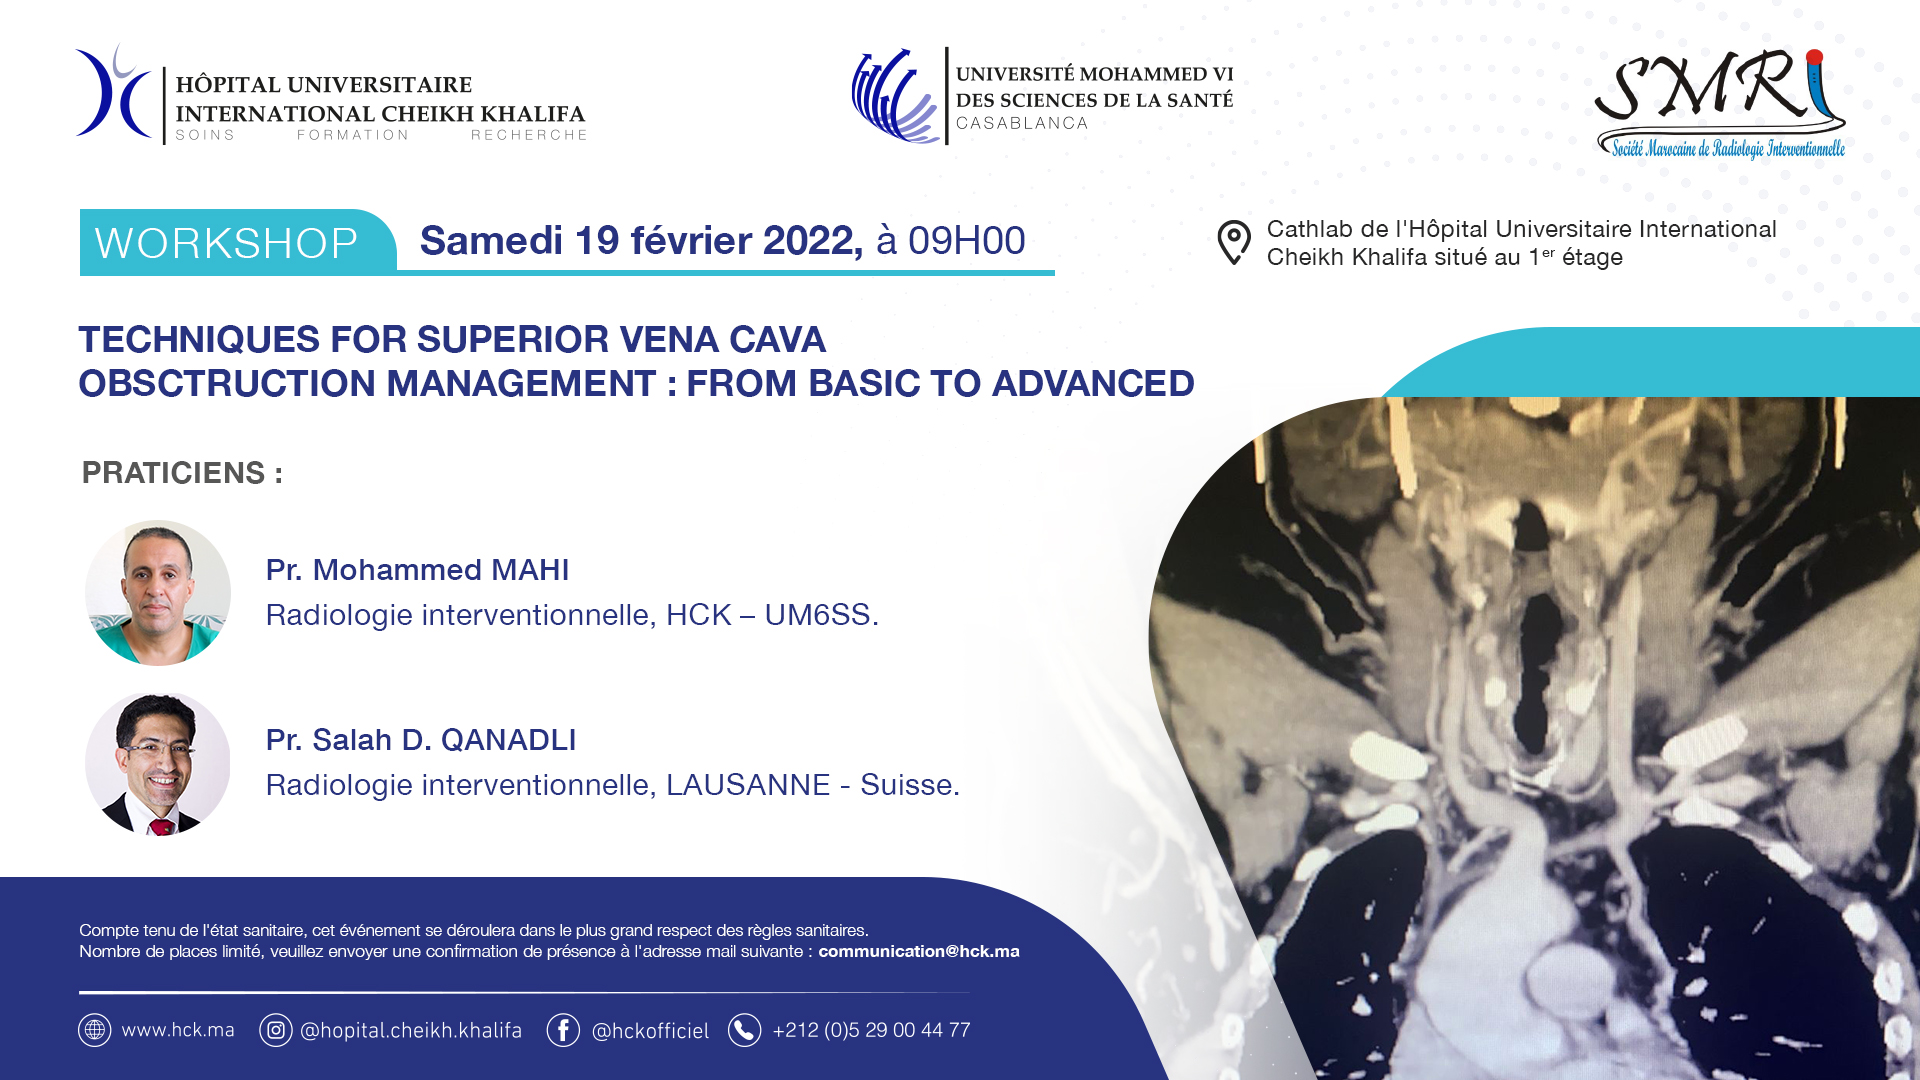 WORKSHOP : TECHNIQUES FOR SUPERIOR VENA CAVA OBSTRUCTION MANAGEMENT : FROM BASIC TO ADVANCED 